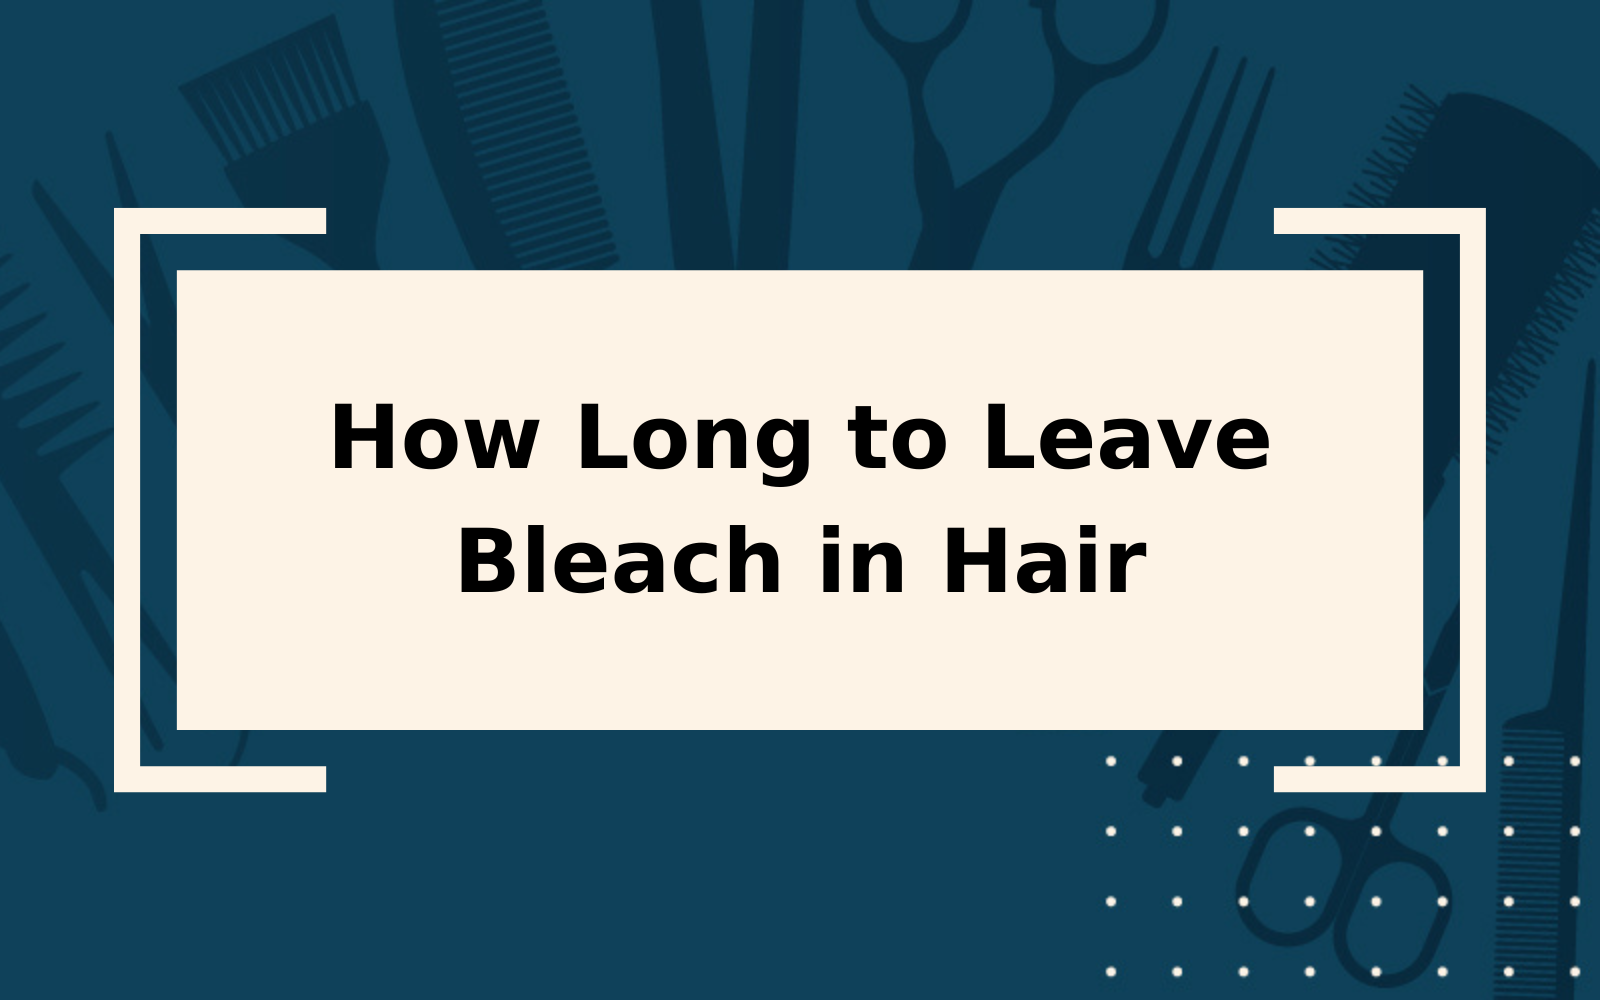 How Long to Leave Bleach in Hair | Things to Consider